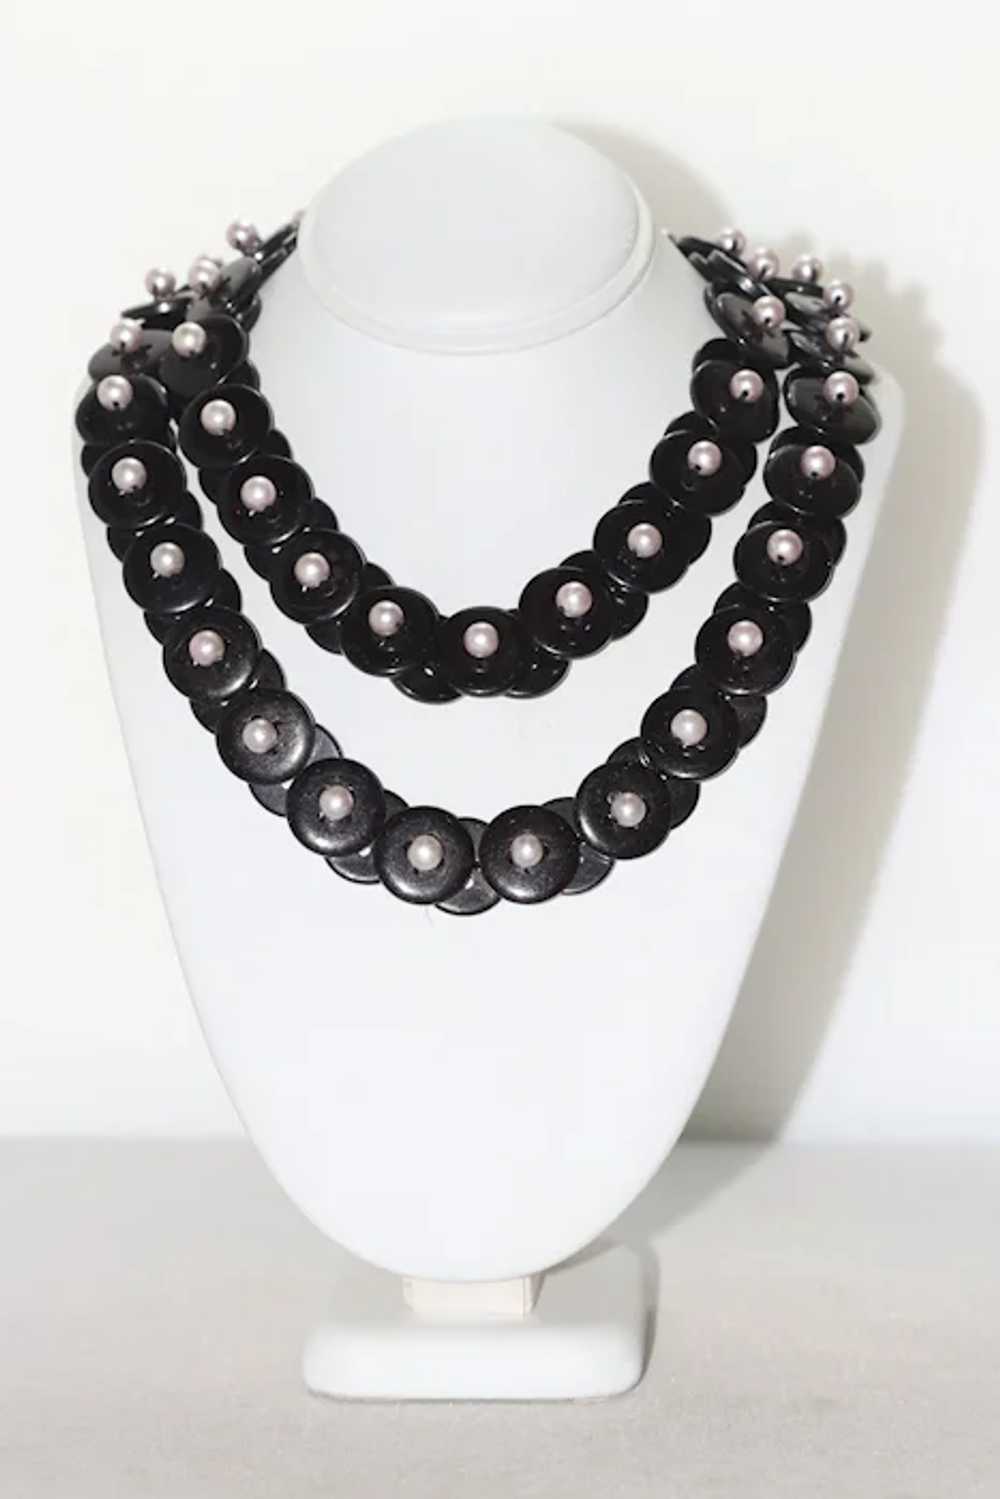 Vintage Handmade Button and Pearl Necklace - image 2